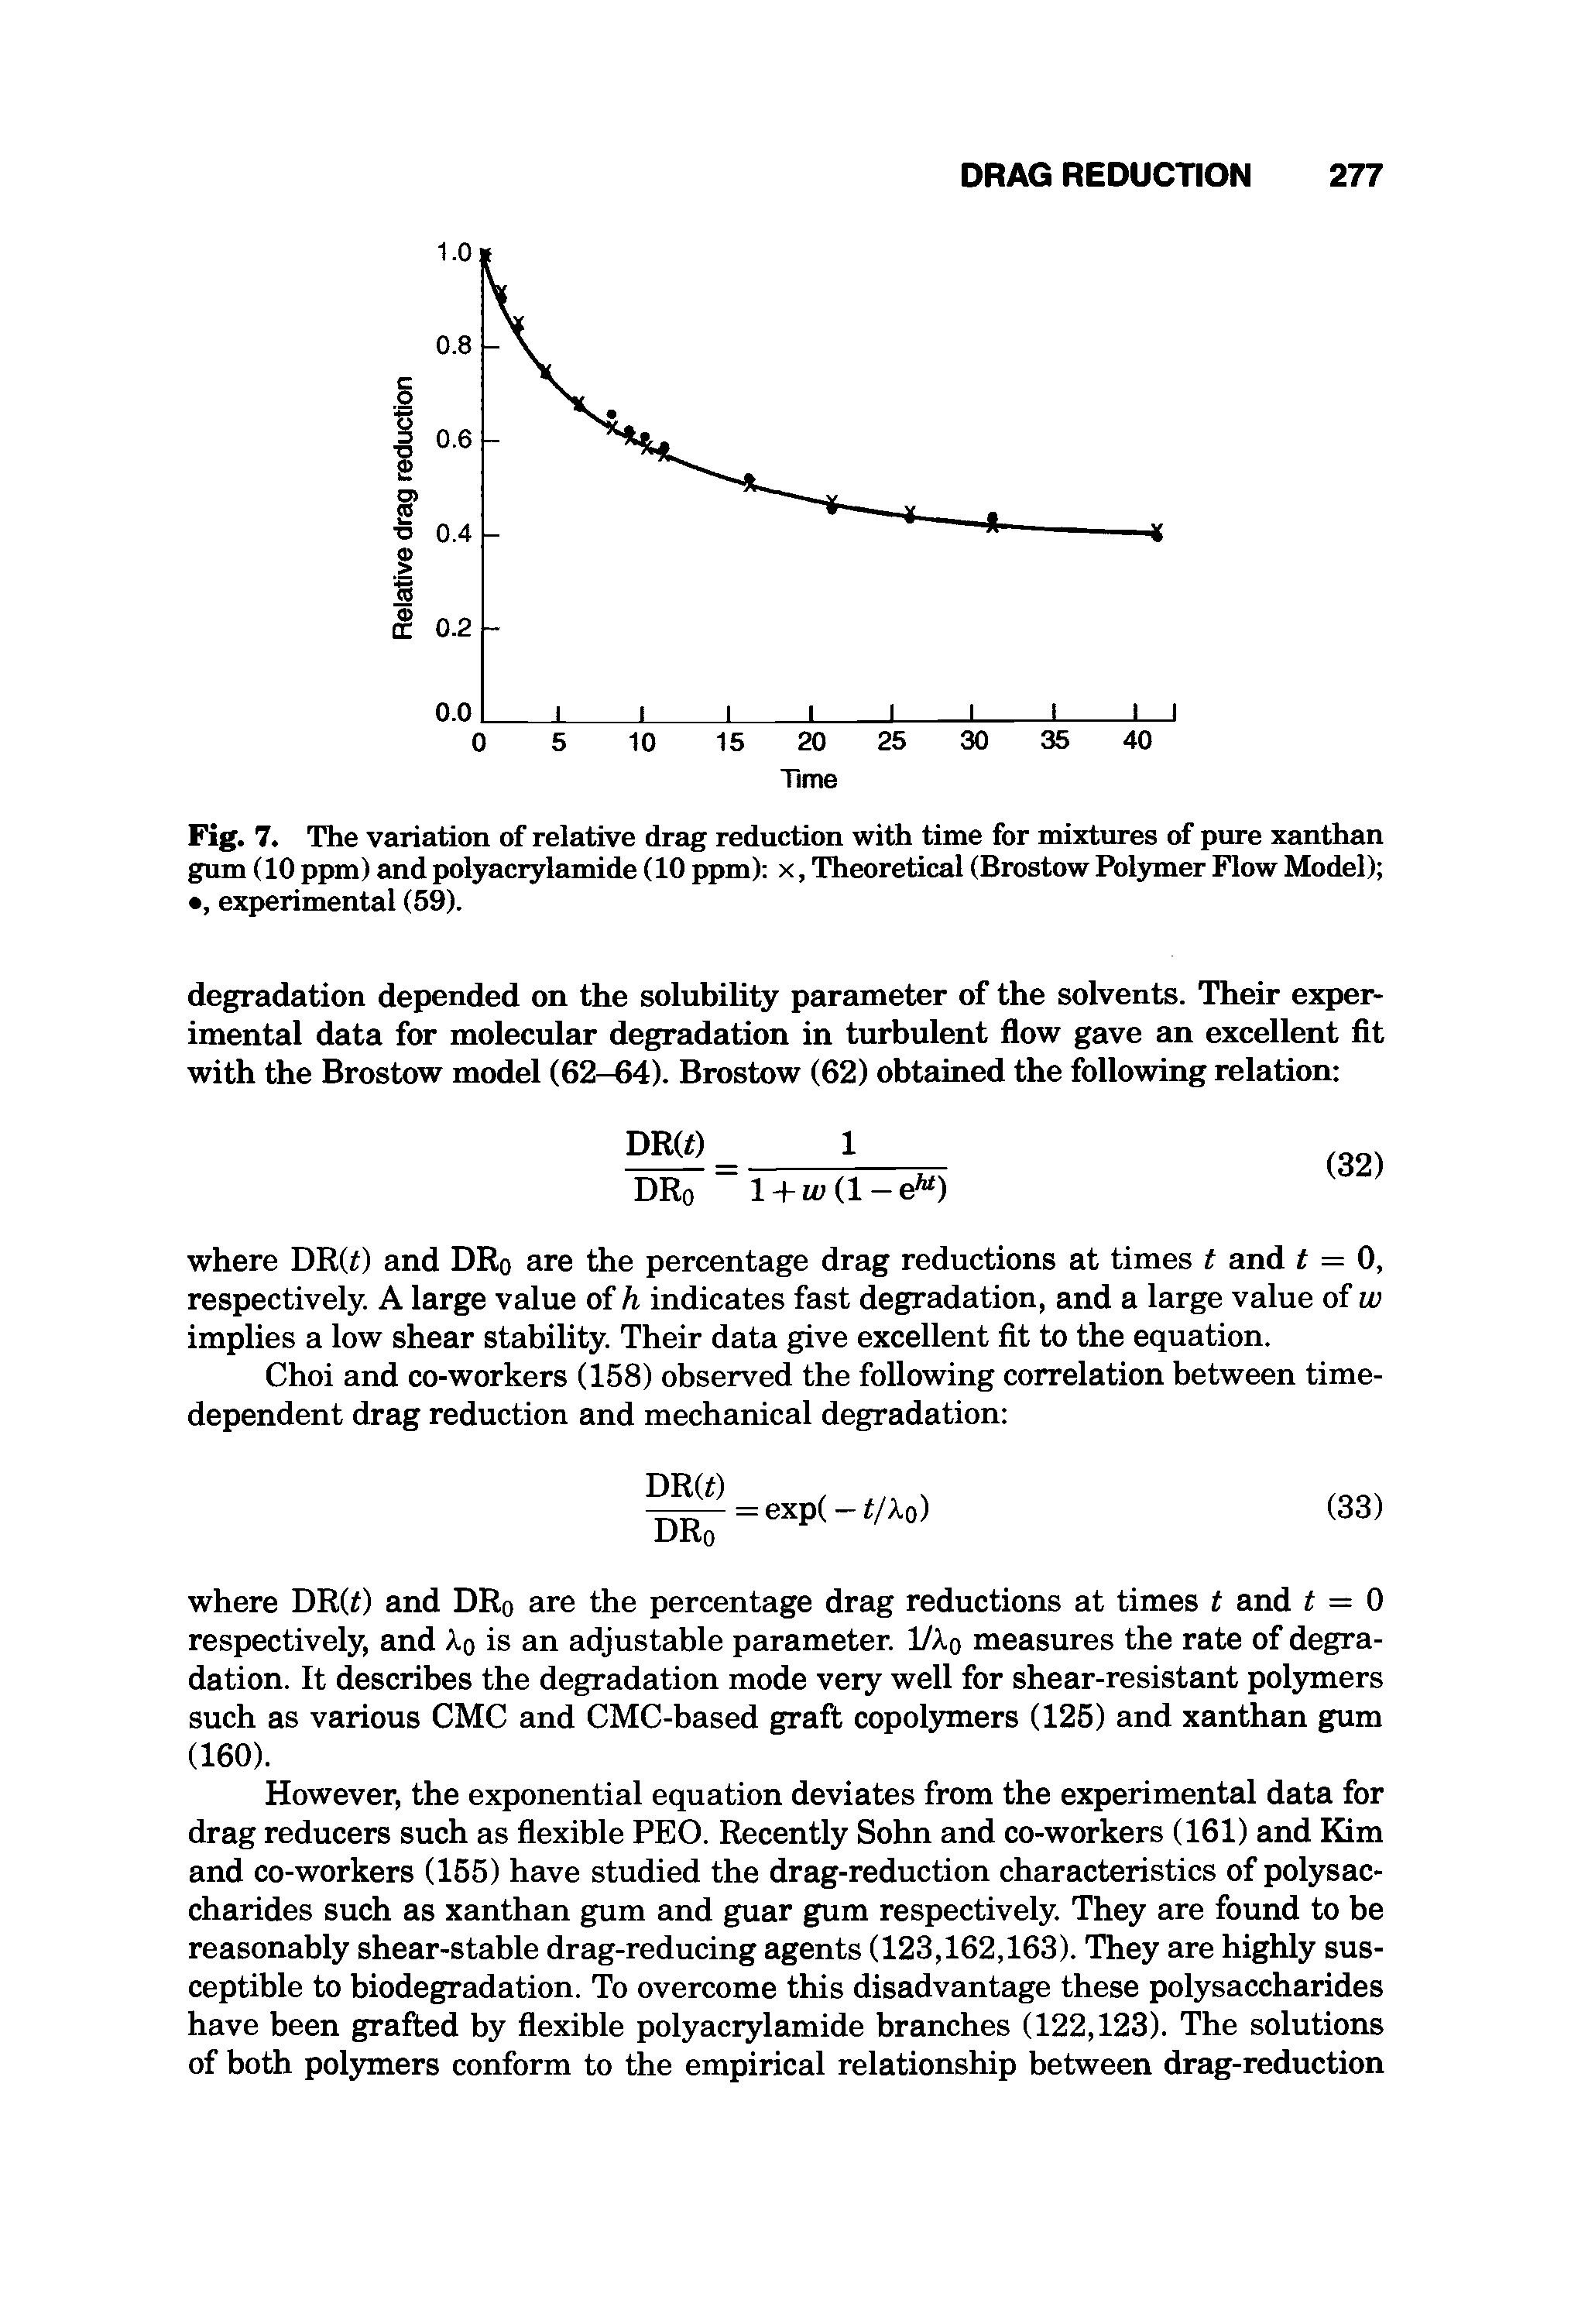 Fig. 7. The variation of relative drag reduction with time for mixtures of pure xanthan gum (10 ppm) and polyacrylamide (10 ppm) x, Theoretical (Brostow Polymer Flow Model) , experimental (59).